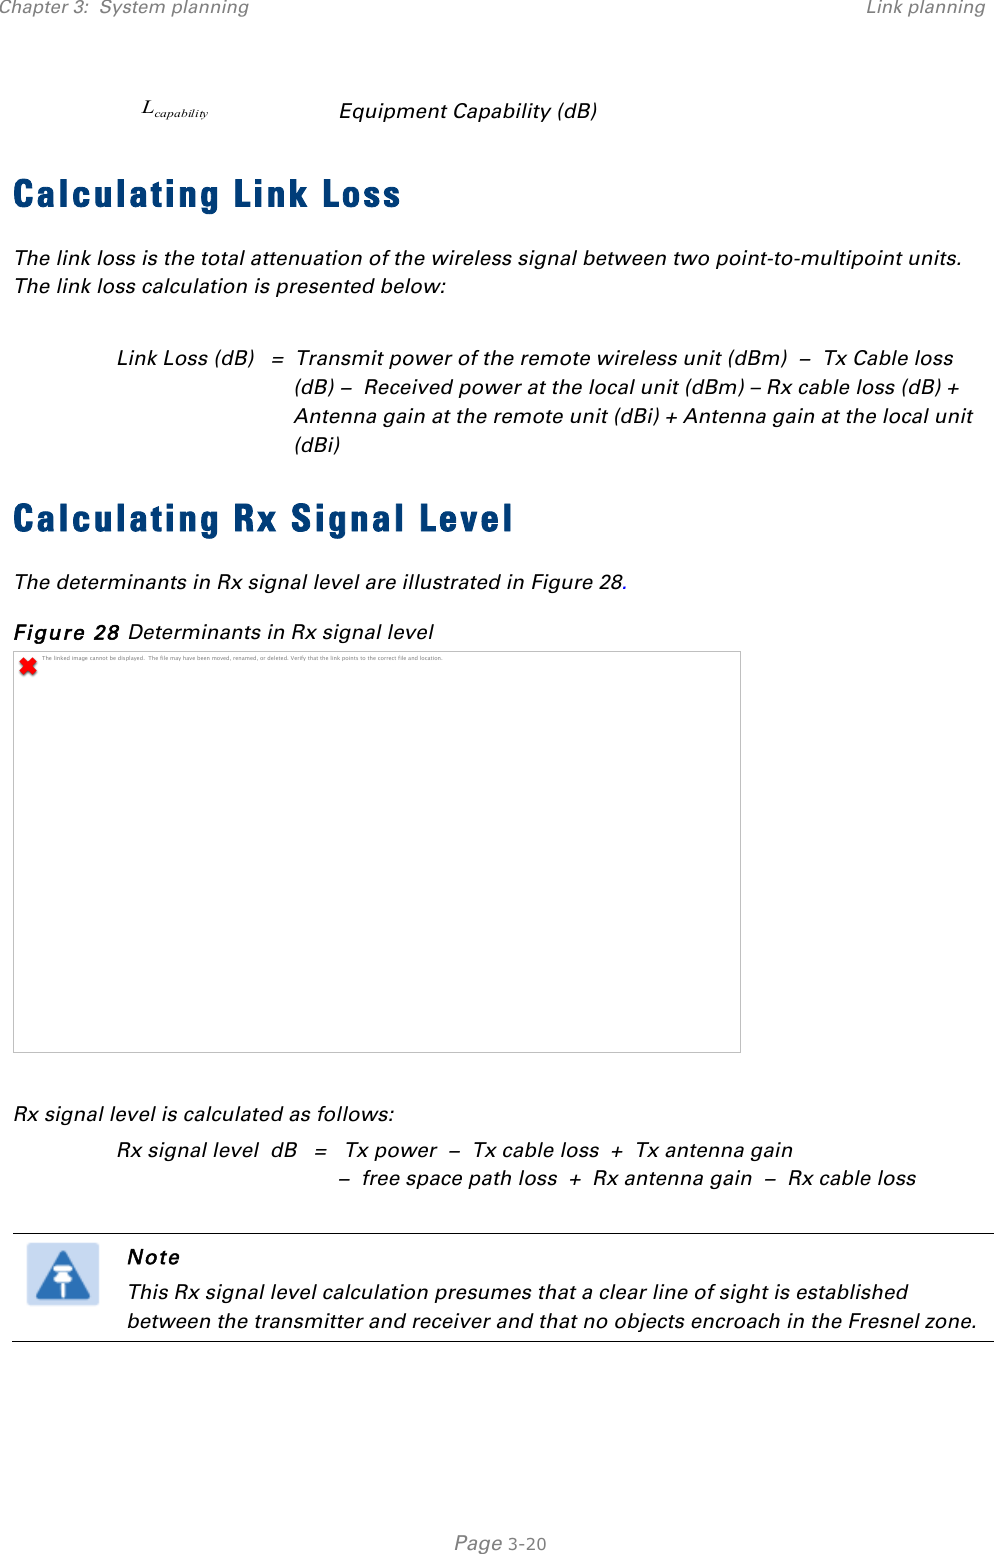 Chapter 3:  System planning Link planning   Page 3-20 capabilityL Equipment Capability (dB) Calculating Link Loss The link loss is the total attenuation of the wireless signal between two point-to-multipoint units. The link loss calculation is presented below:  Link Loss (dB)   =  Transmit power of the remote wireless unit (dBm)  −  Tx Cable loss (dB) −  Received power at the local unit (dBm) – Rx cable loss (dB) + Antenna gain at the remote unit (dBi) + Antenna gain at the local unit (dBi) Calculating Rx Signal Level The determinants in Rx signal level are illustrated in Figure 28. Figure 28 Determinants in Rx signal level   Rx signal level is calculated as follows: Rx signal level  dB   =   Tx power  −  Tx cable loss  +  Tx antenna gain   −  free space path loss  +  Rx antenna gain  −  Rx cable loss   Note This Rx signal level calculation presumes that a clear line of sight is established between the transmitter and receiver and that no objects encroach in the Fresnel zone.  The linked image cannot be displayed.  The file may have been moved, renamed, or deleted. Verify that the link points to the correct file and location.